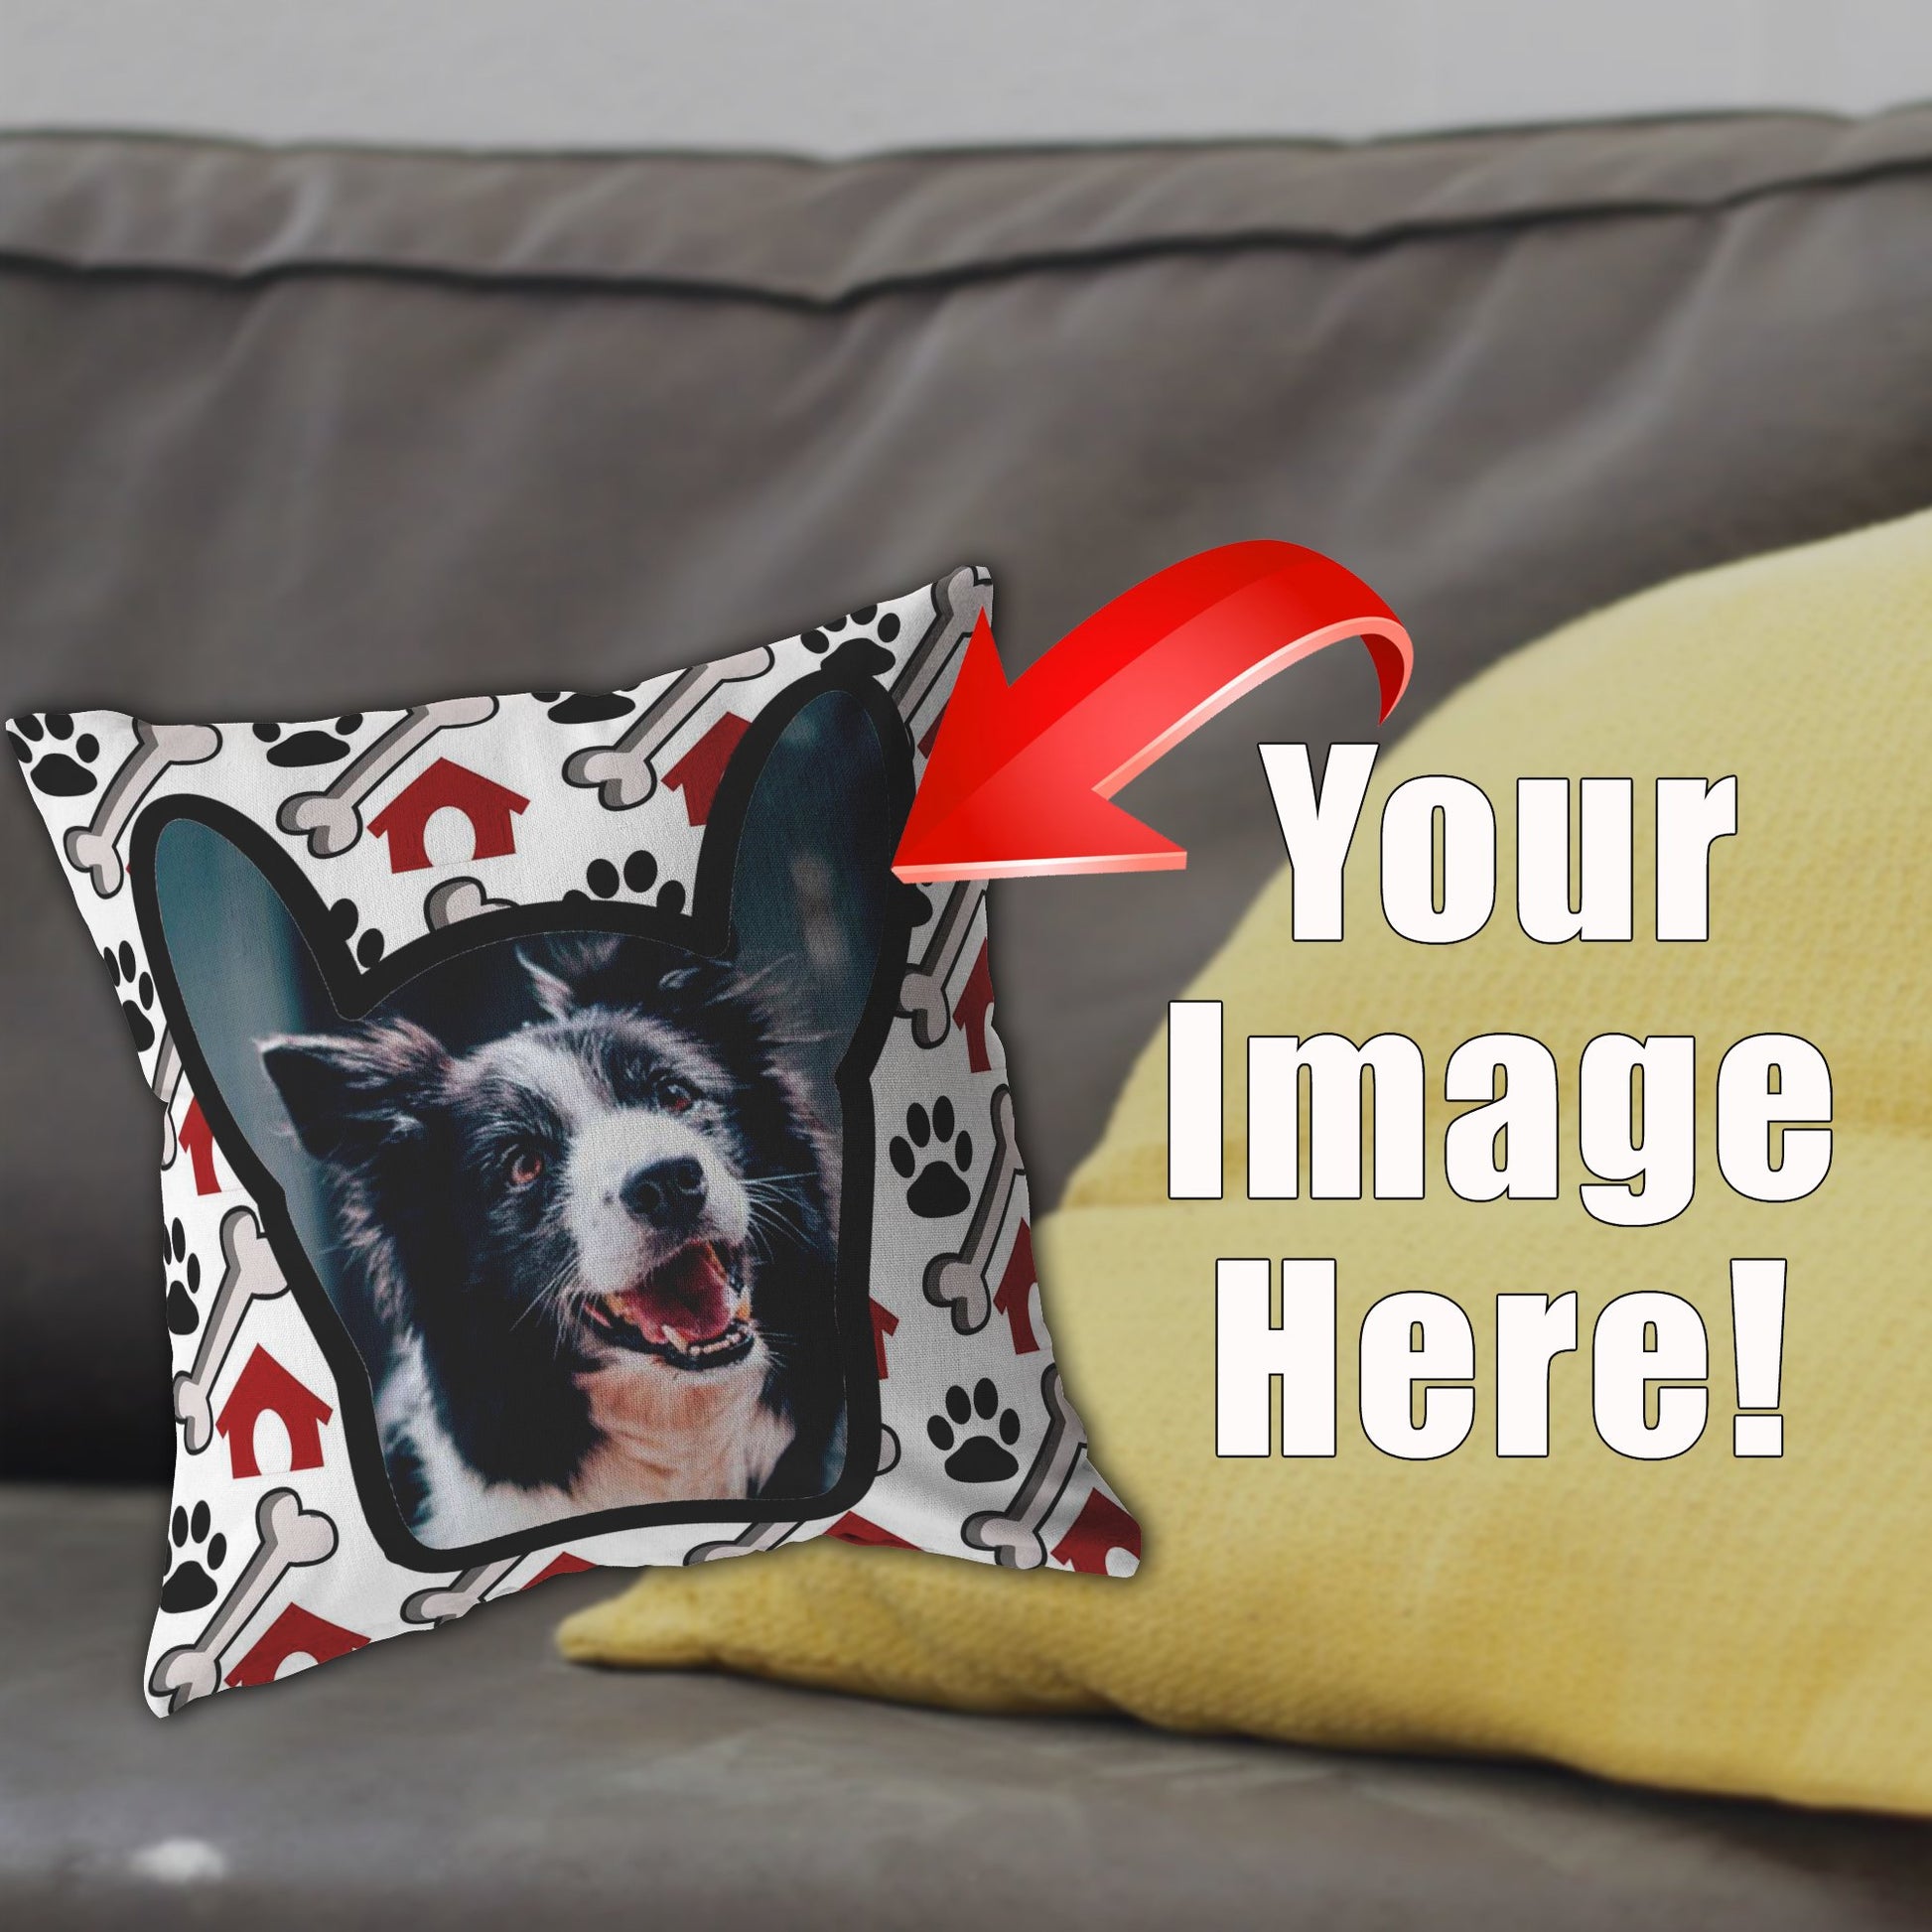 Personalized pillow for dogs